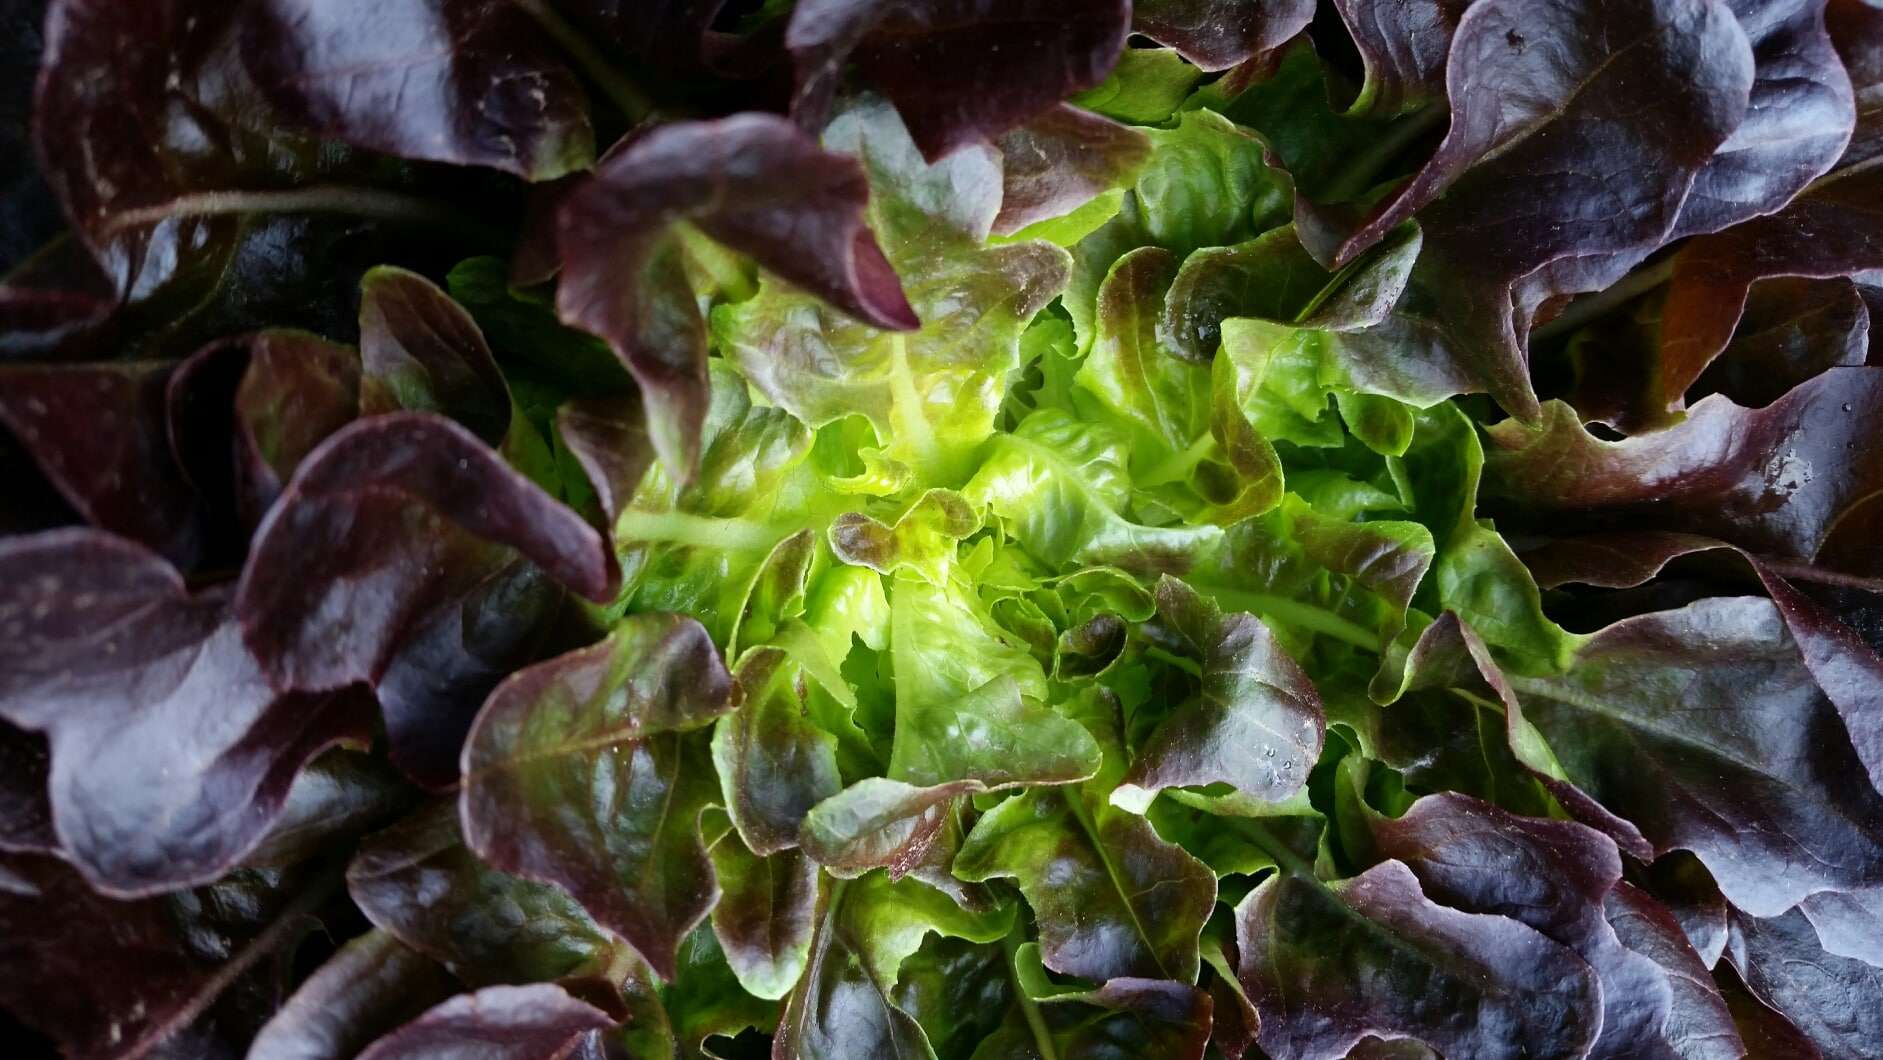 Red and green leaf lettuce